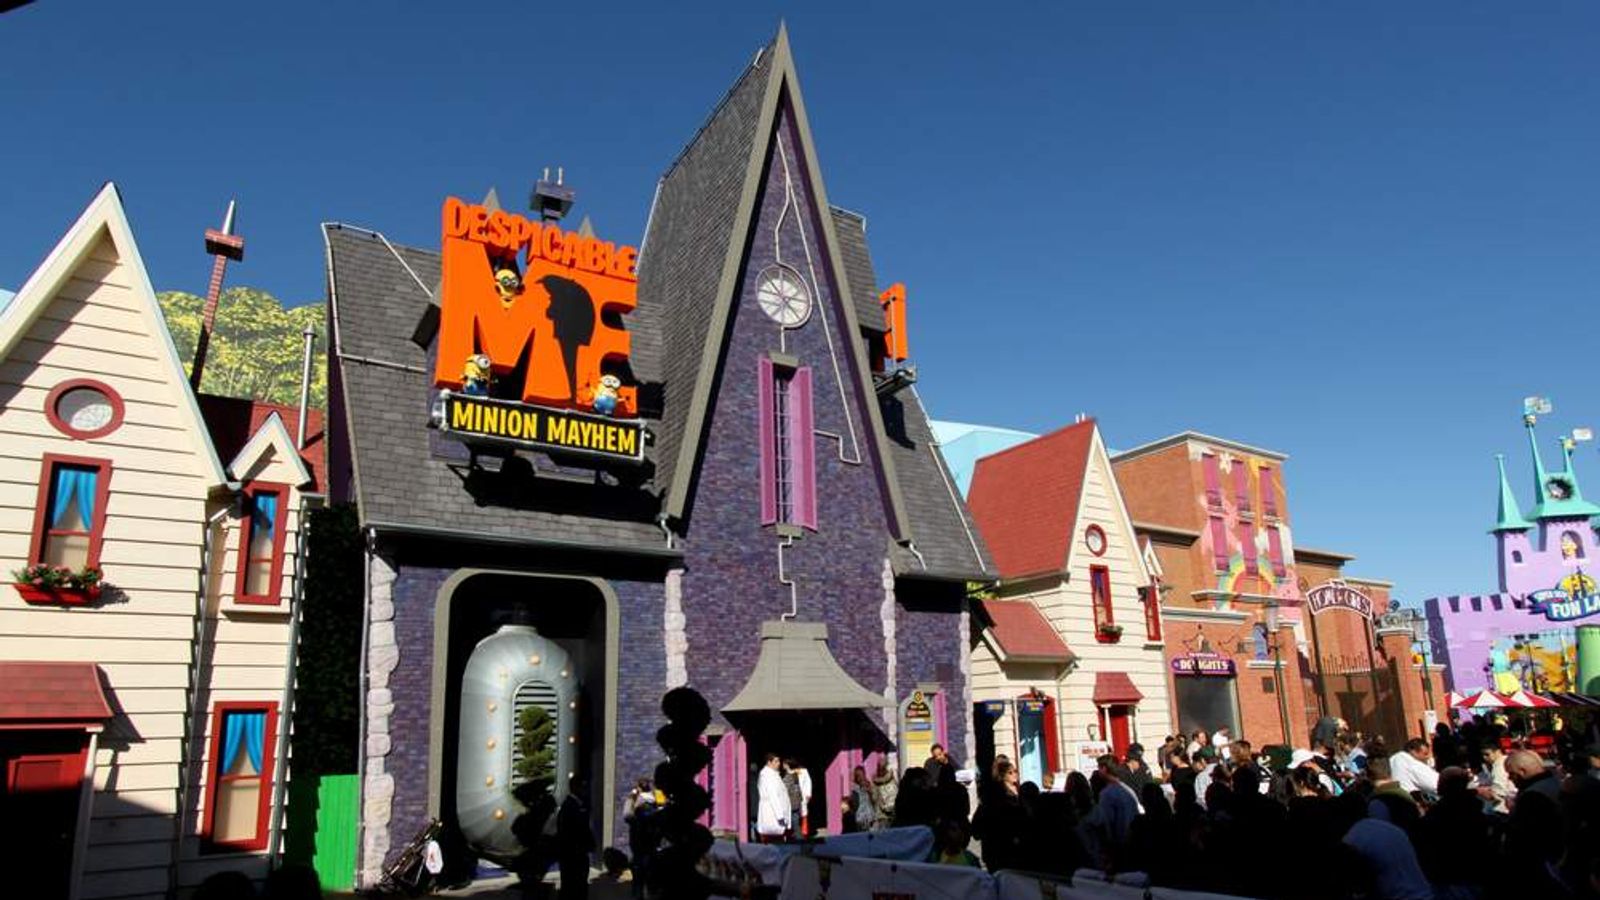 Download Man Shoots Himself Near 'Despicable Me' Ride | US News ...